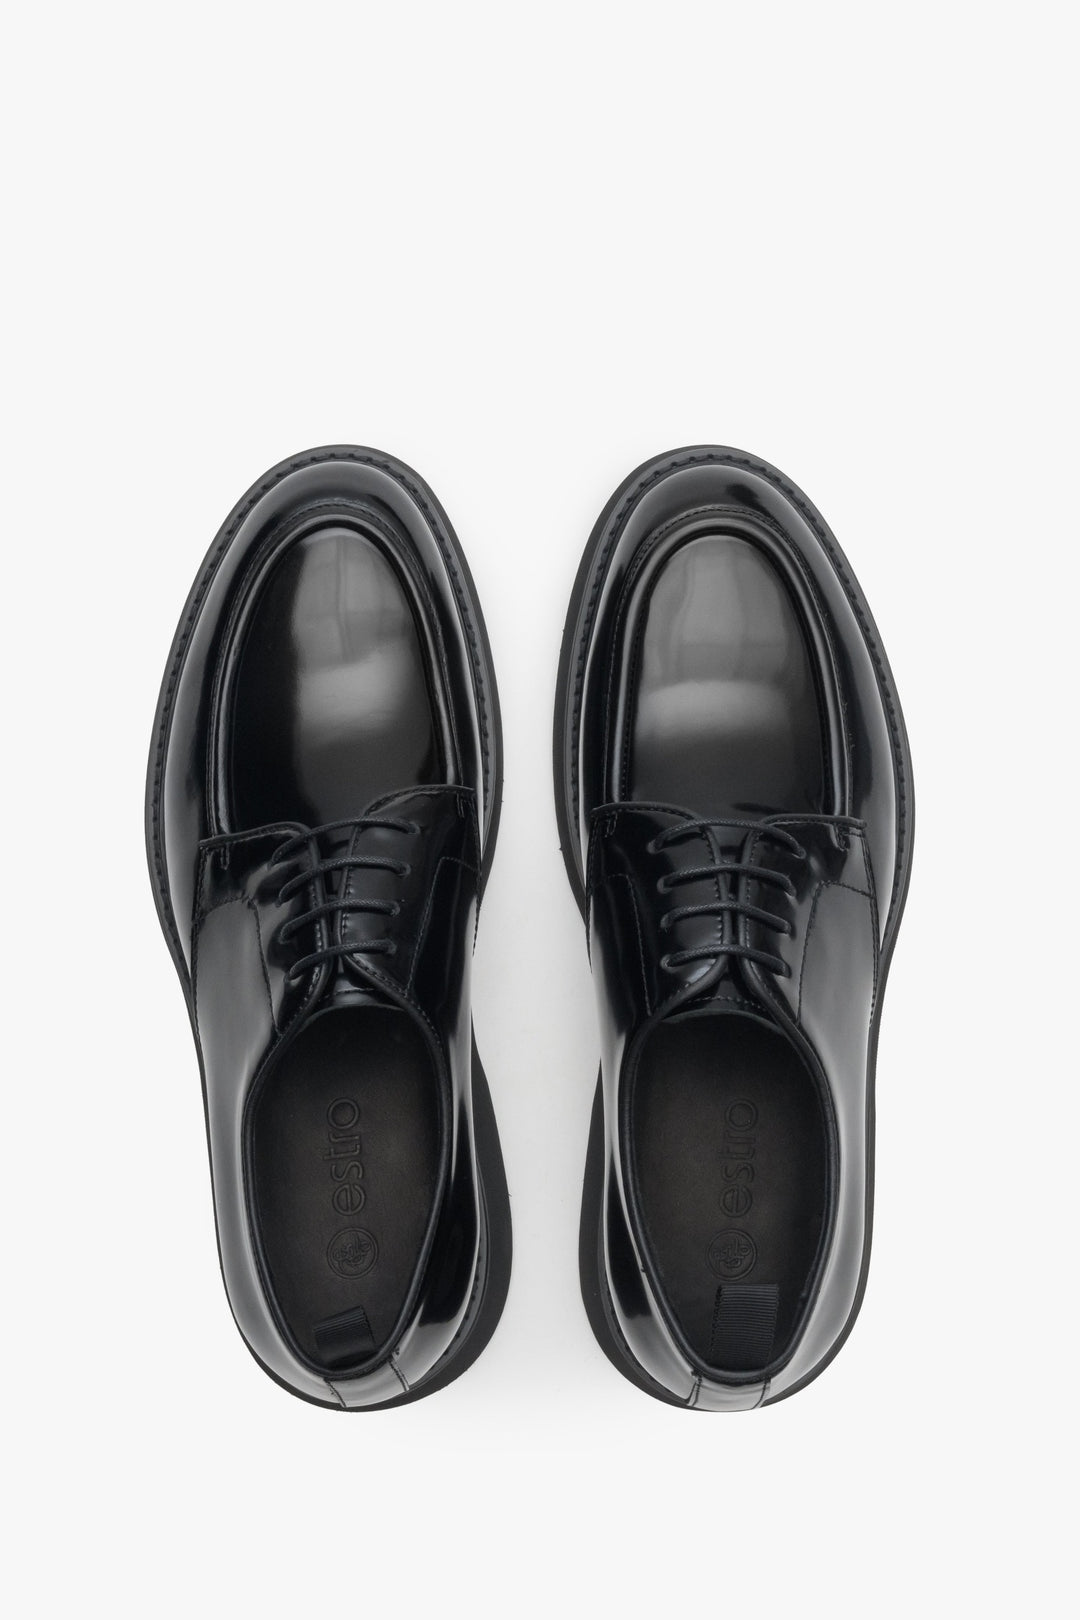 Men's black patent leather brogues  - top view presentation of the model.